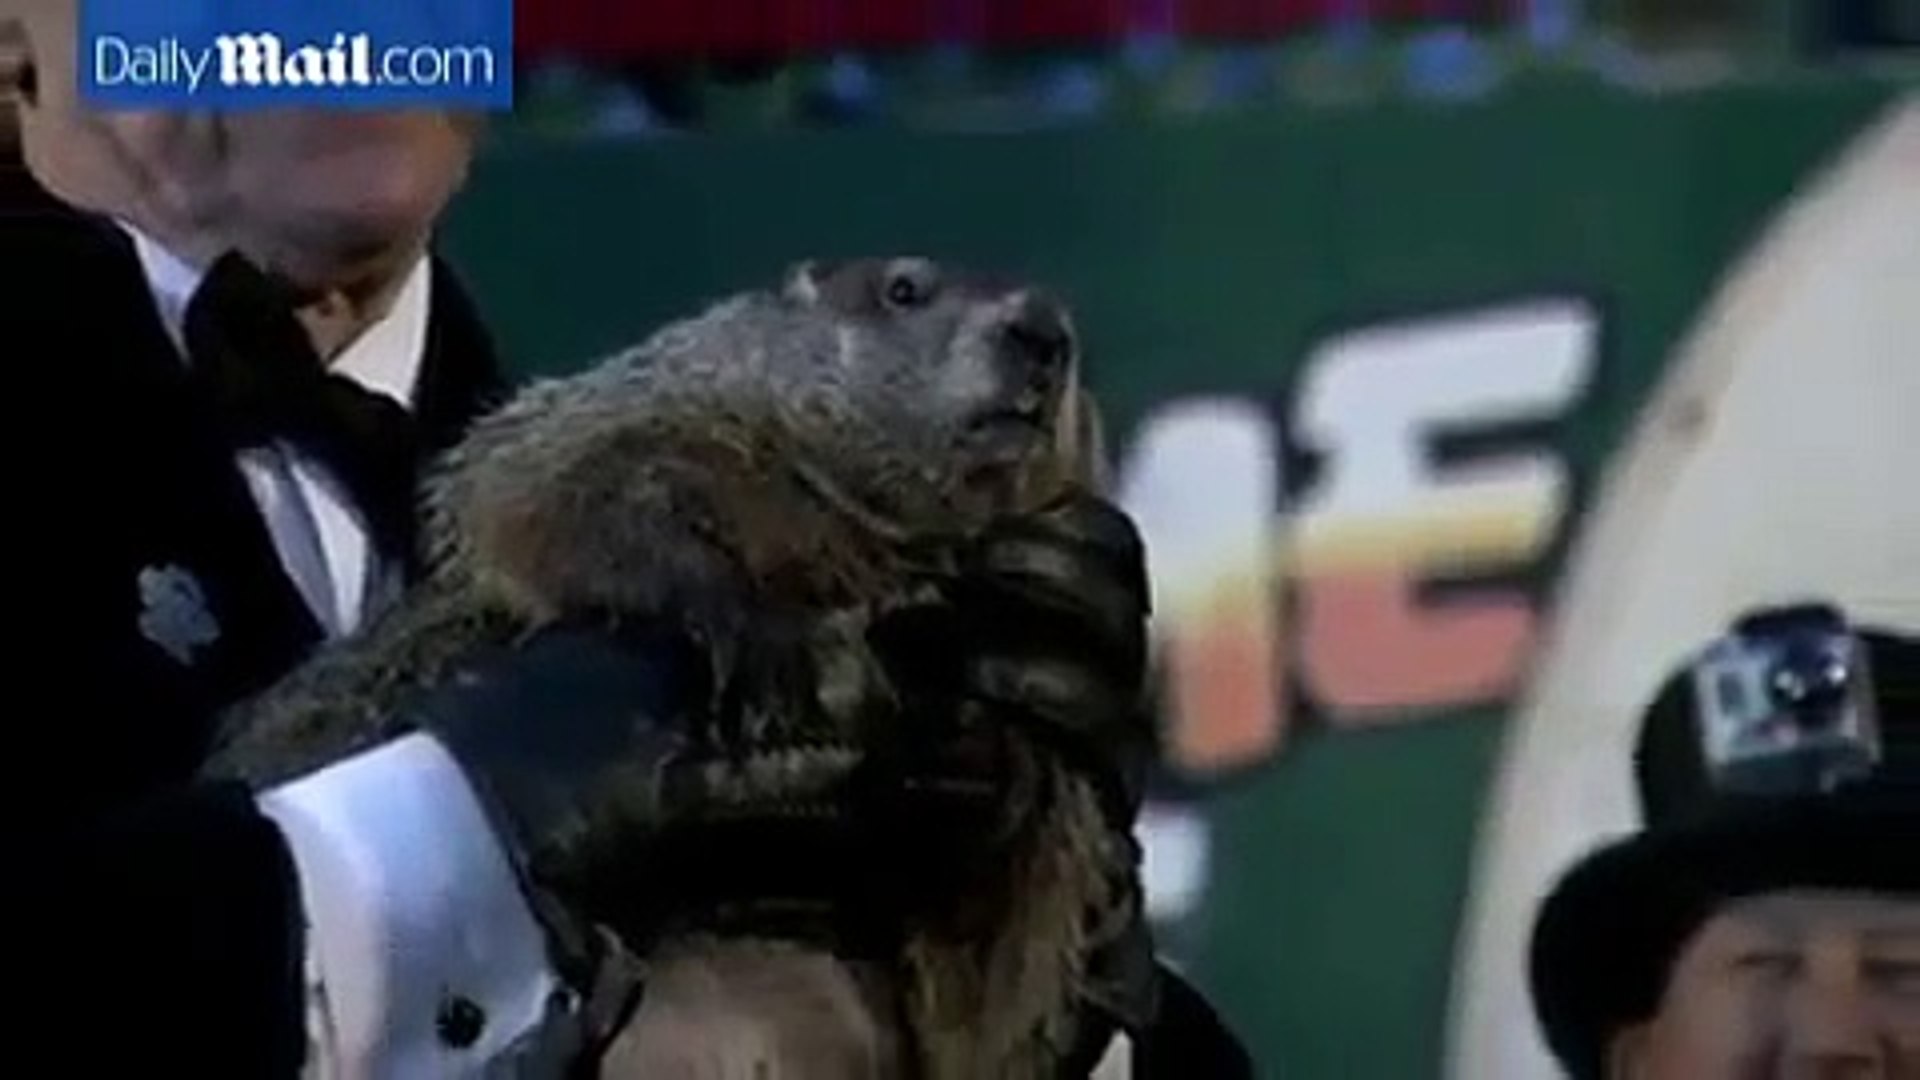 So how long will winter last when the Groundhog ATTACKS the mayor?